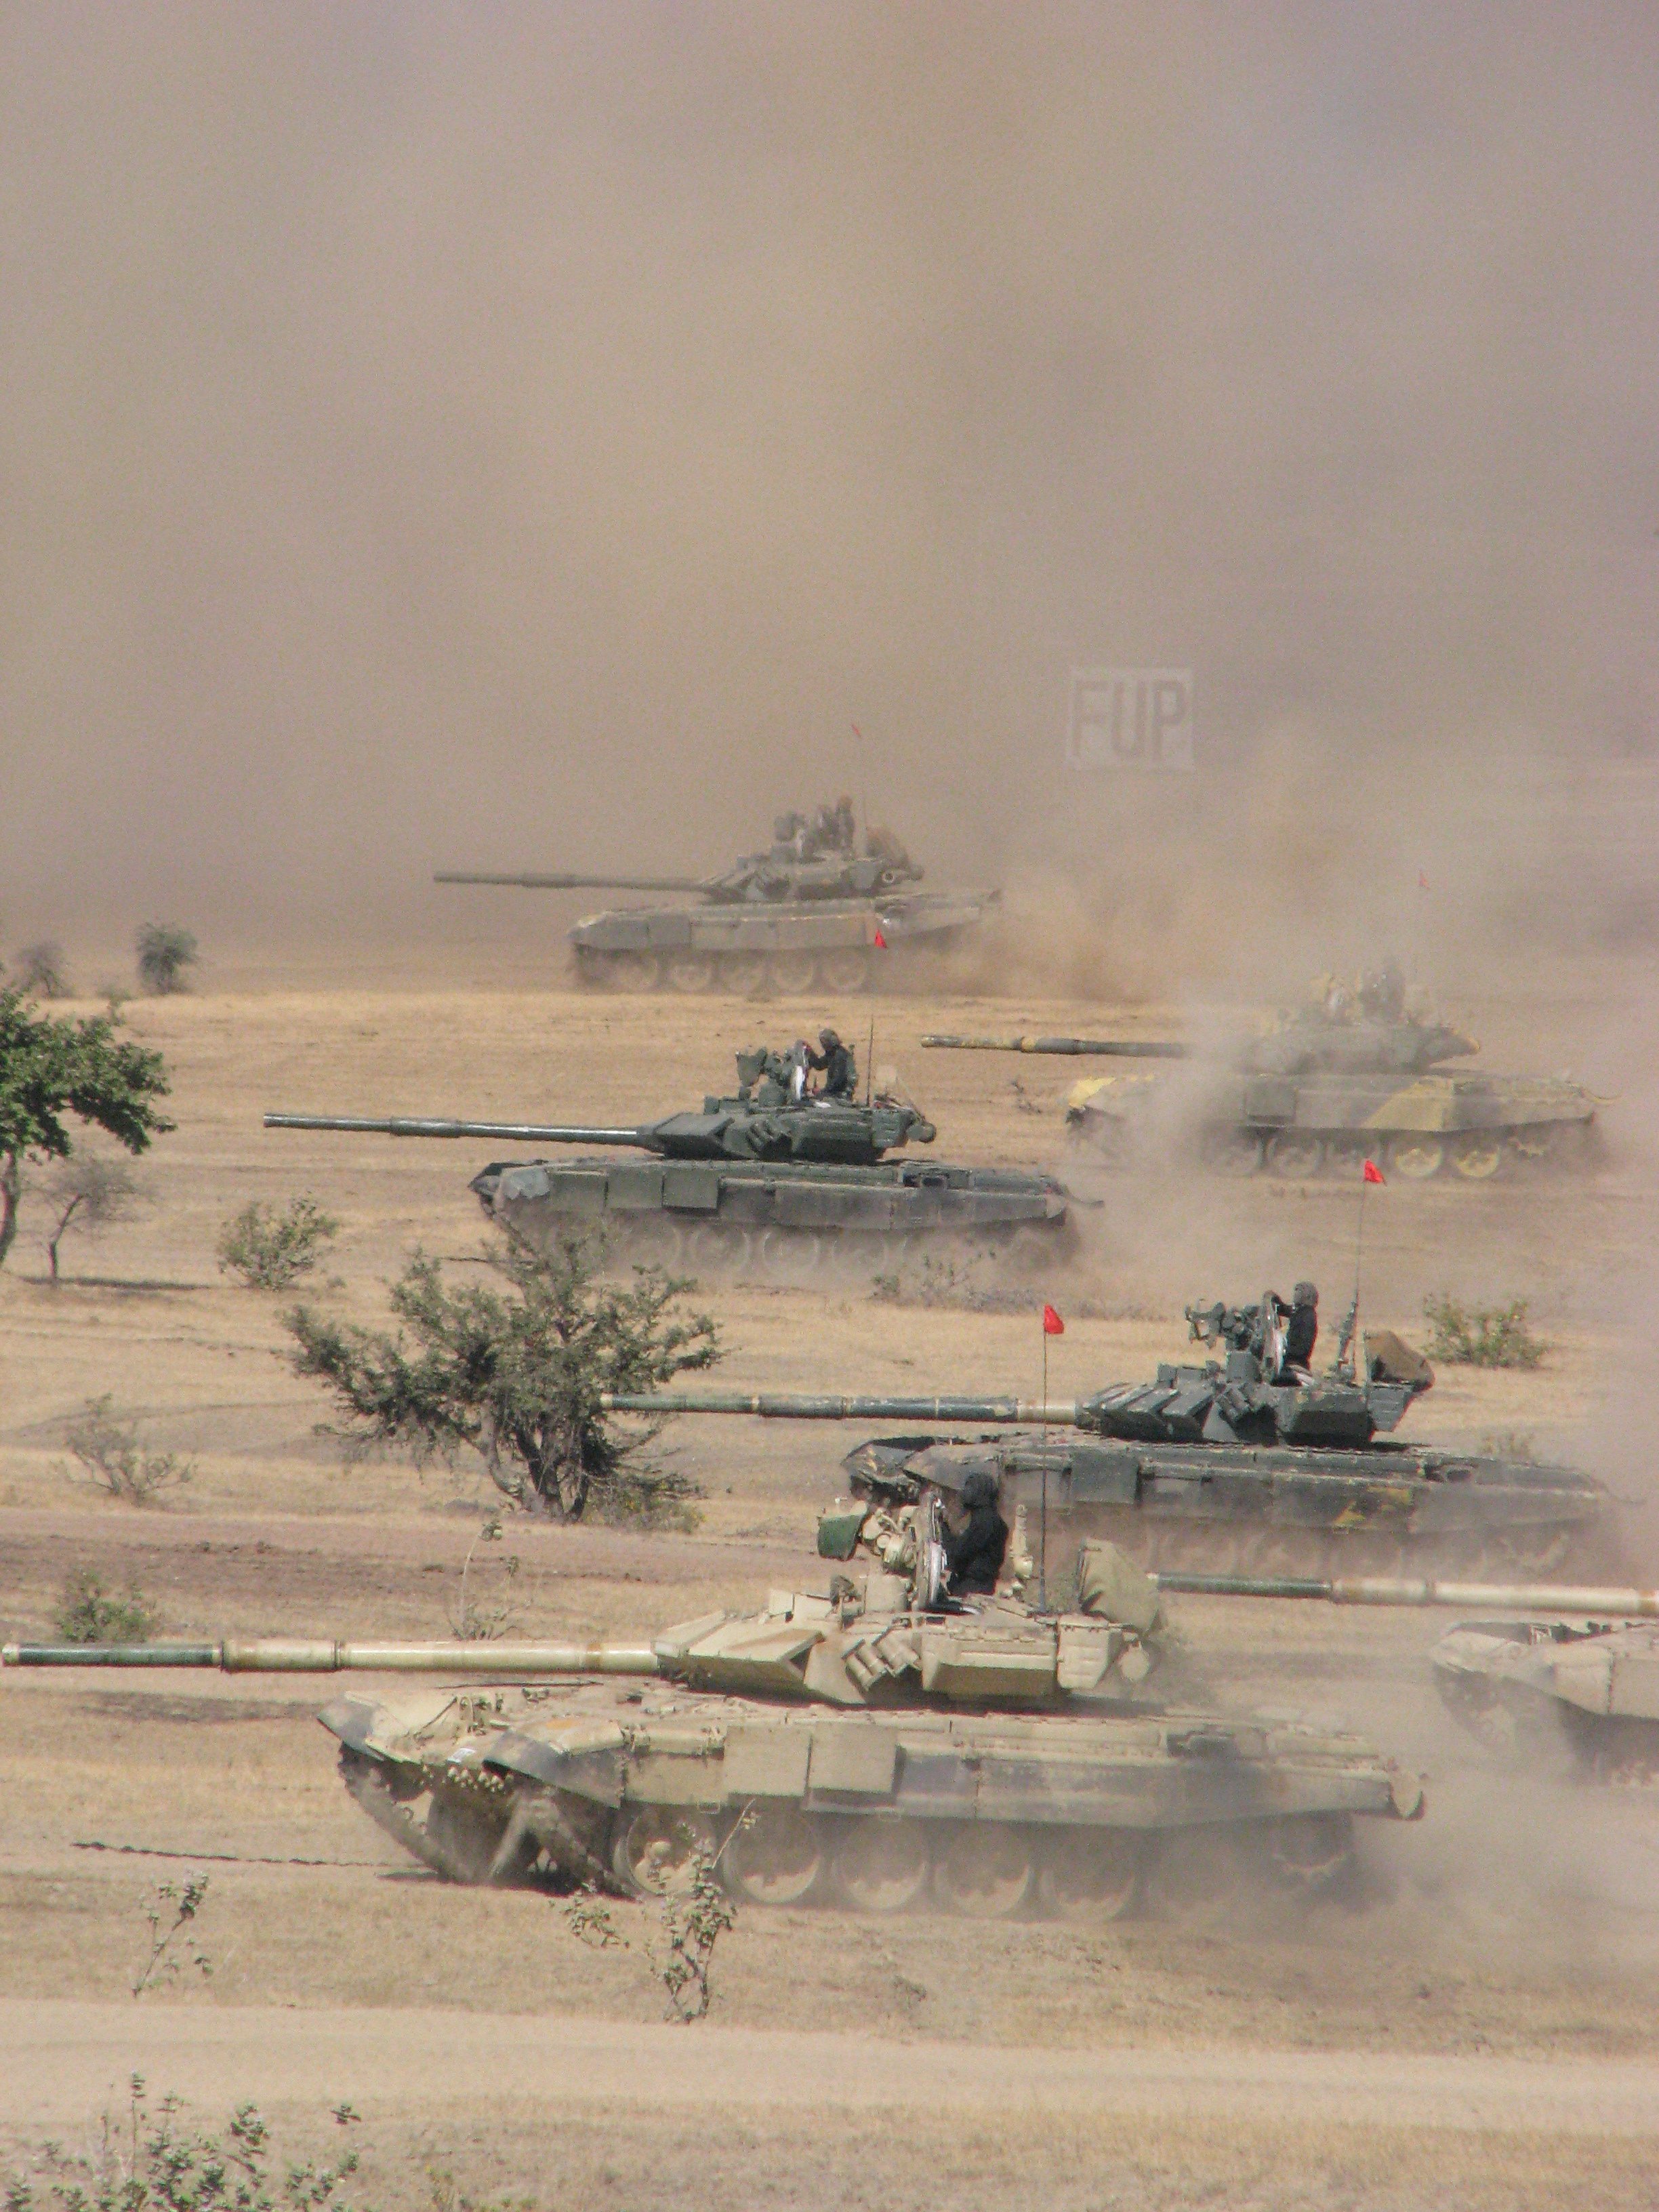 IA_T-90_in_action.jpg